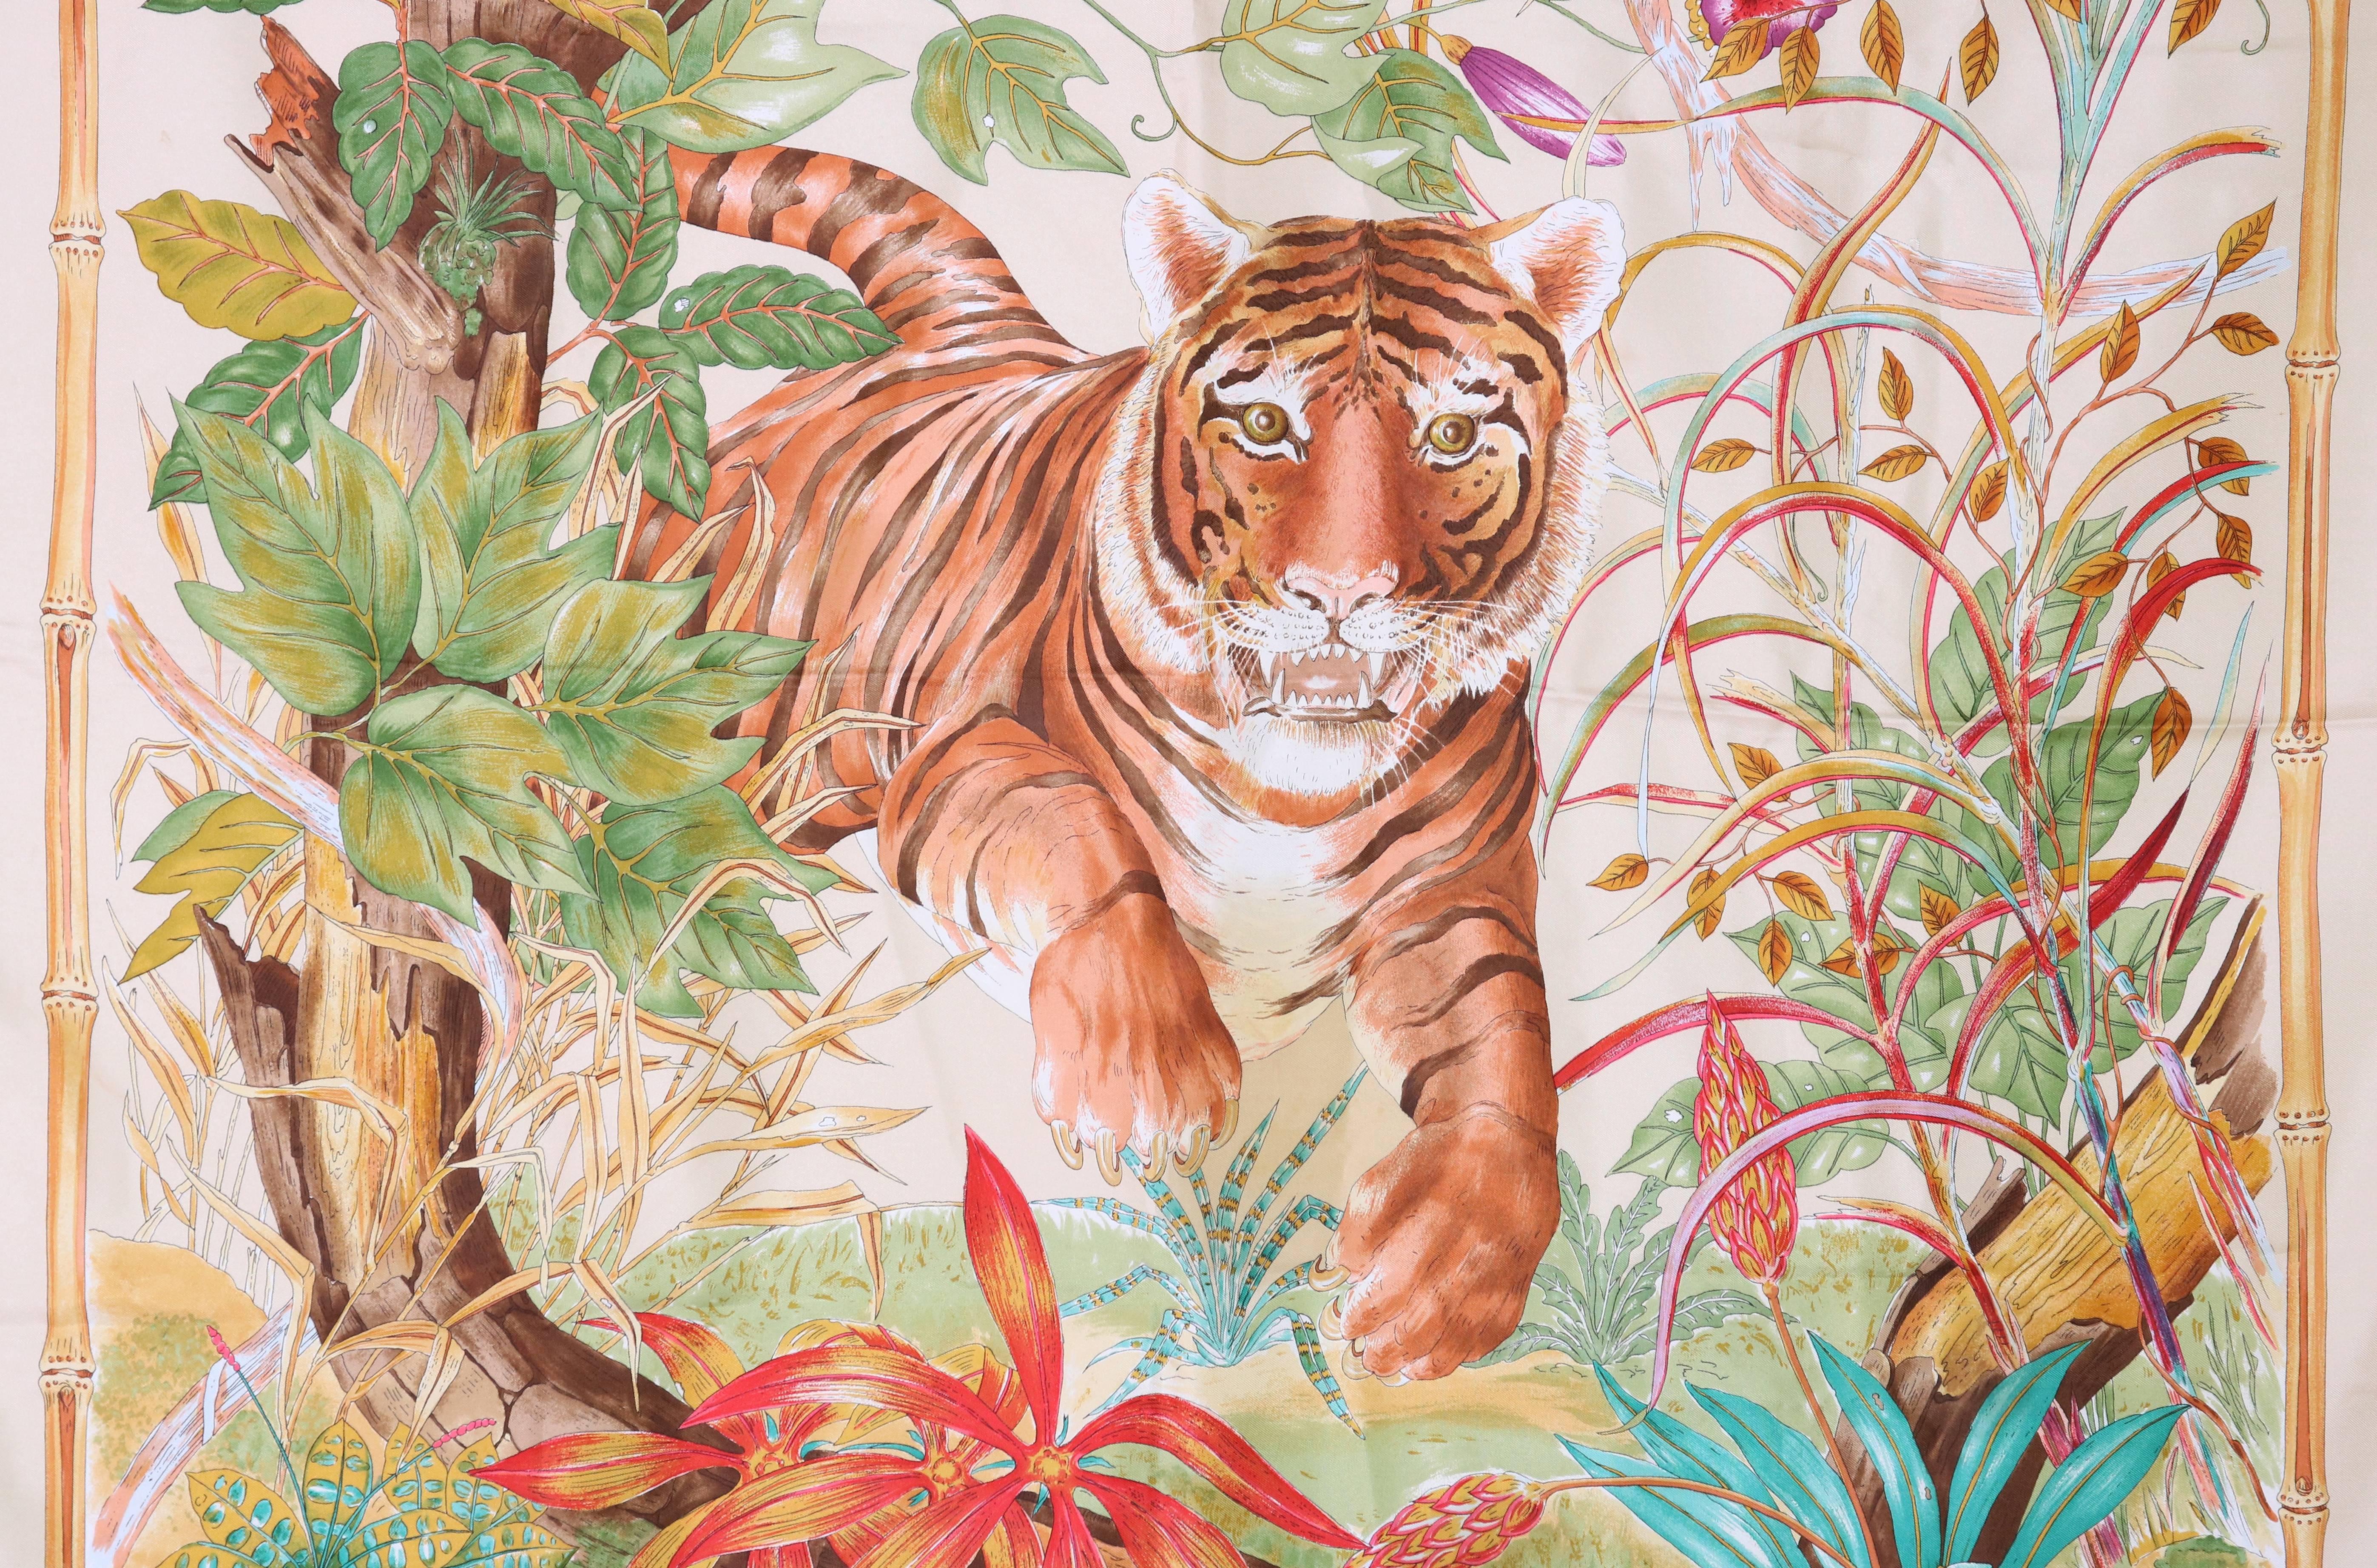 1970's Gucci silk scarf w/ a tiger in the jungle framed by a bamboo border. Gucci logo in upper left and lower right corner. In excellent condition. 
MEASUREMENTS:
34